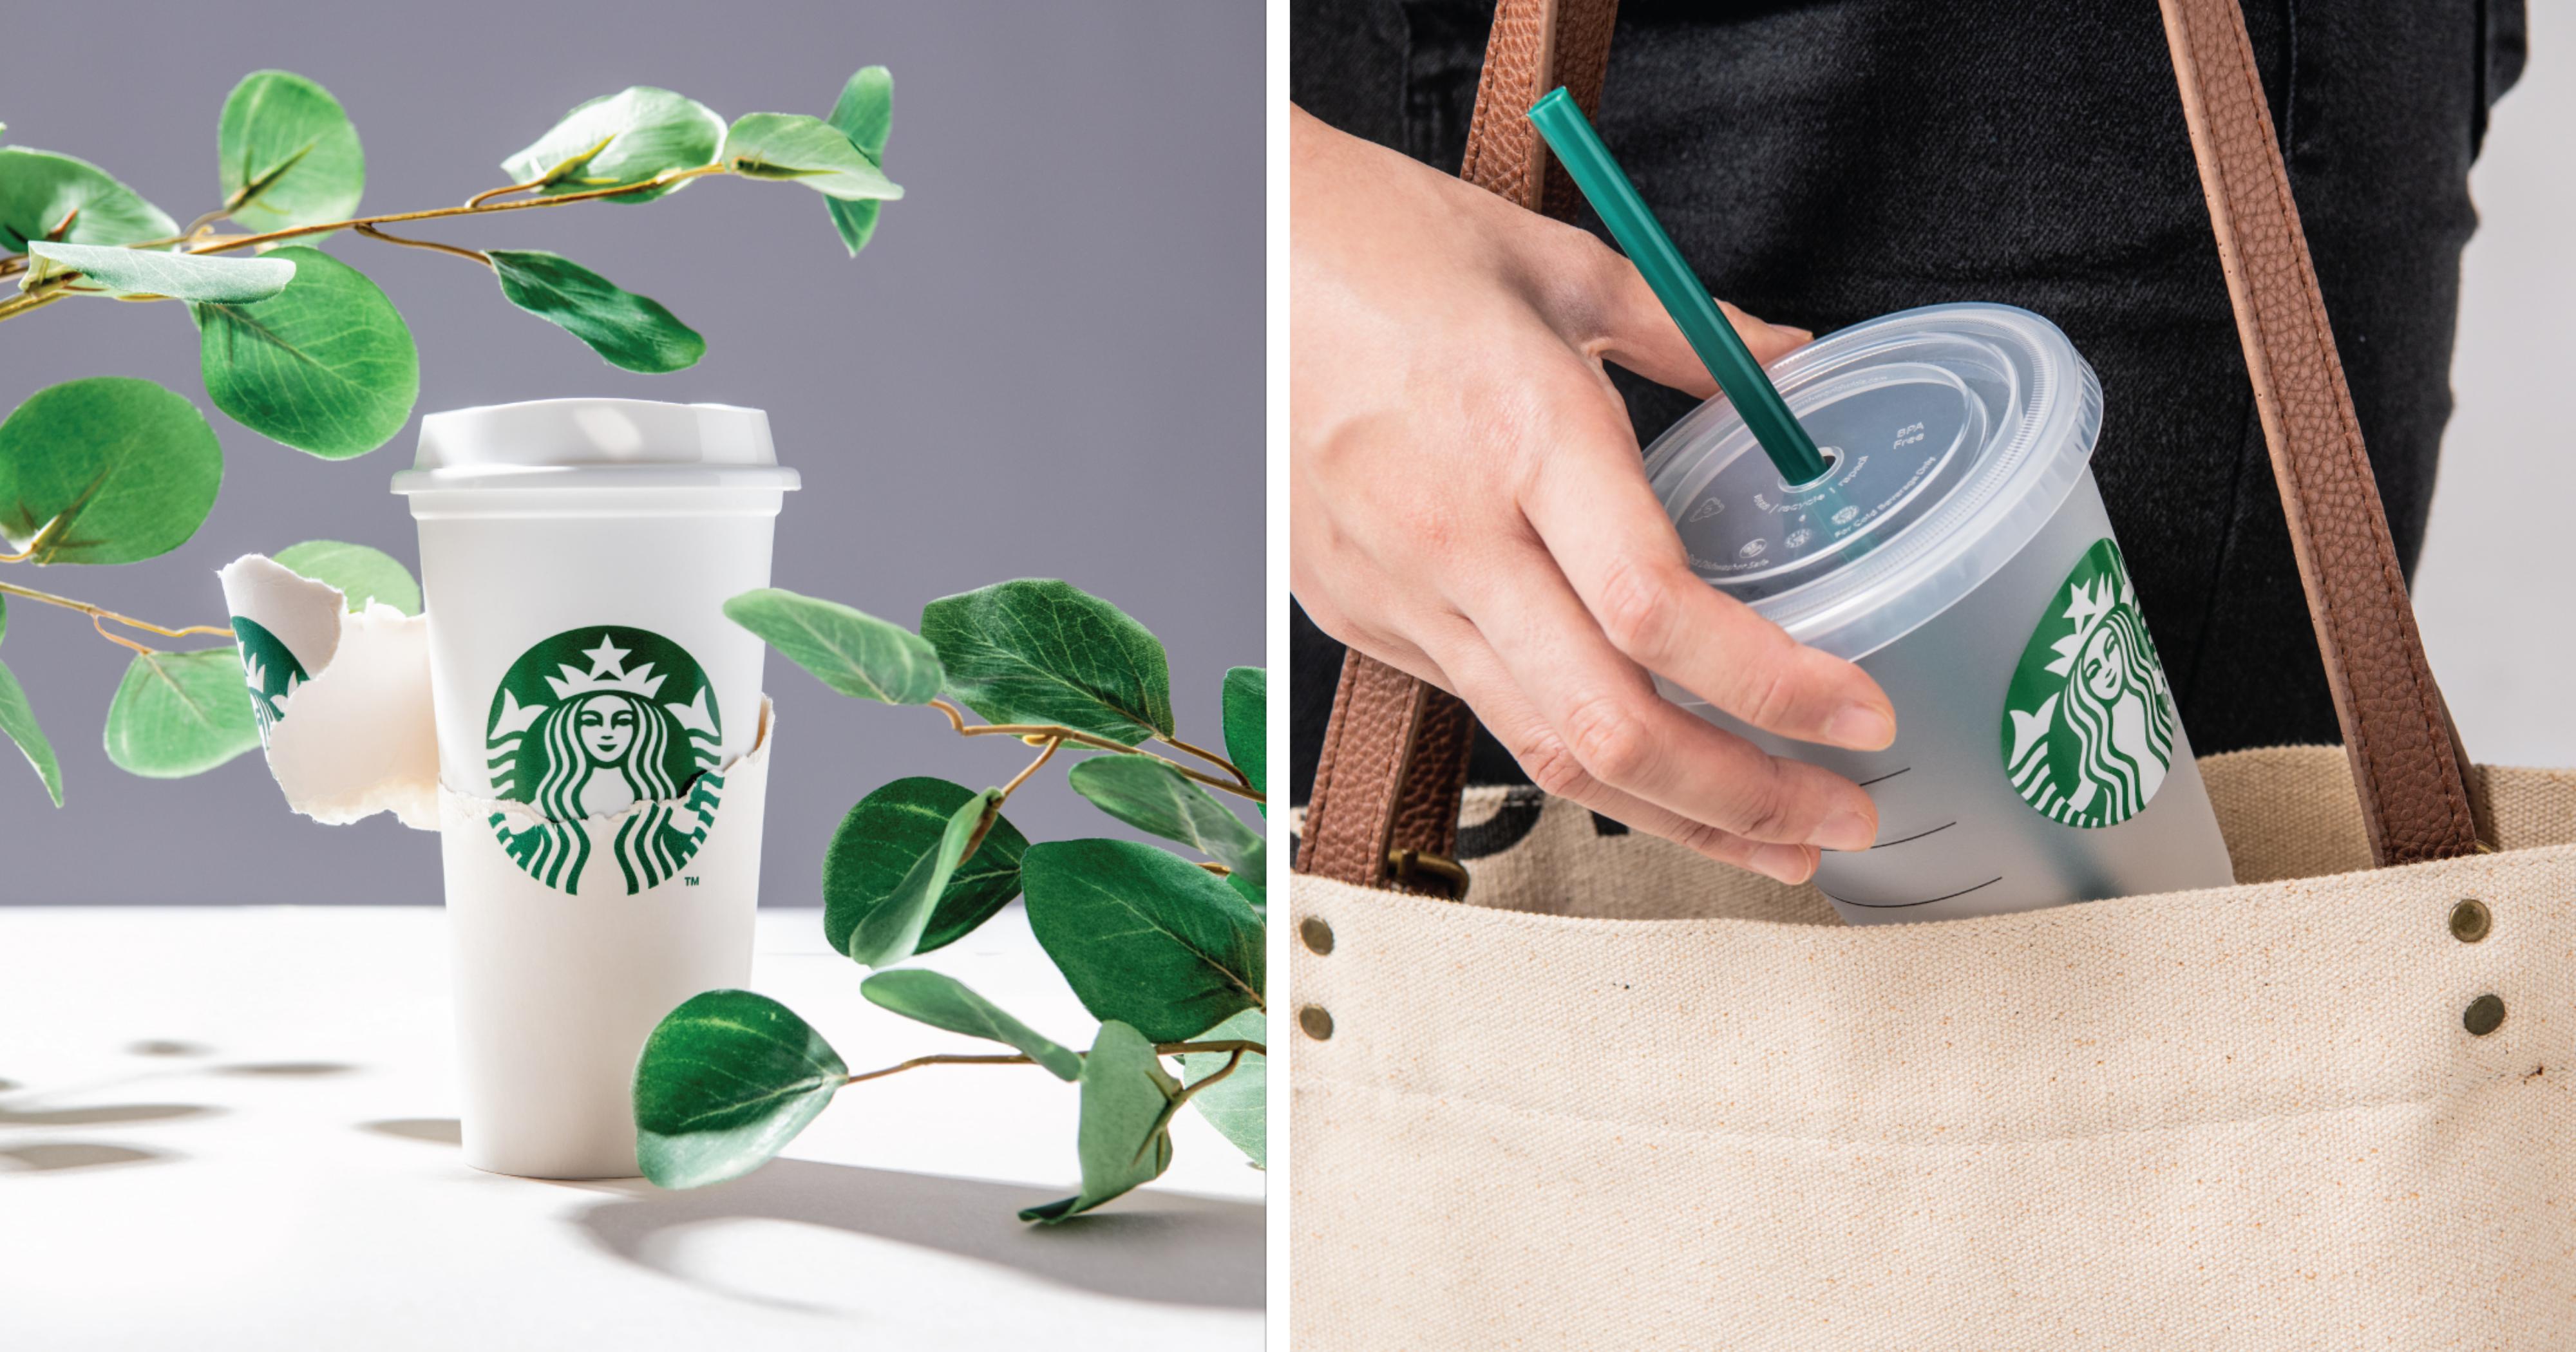 Starbucks S'pore selling reusable version of their cups from S